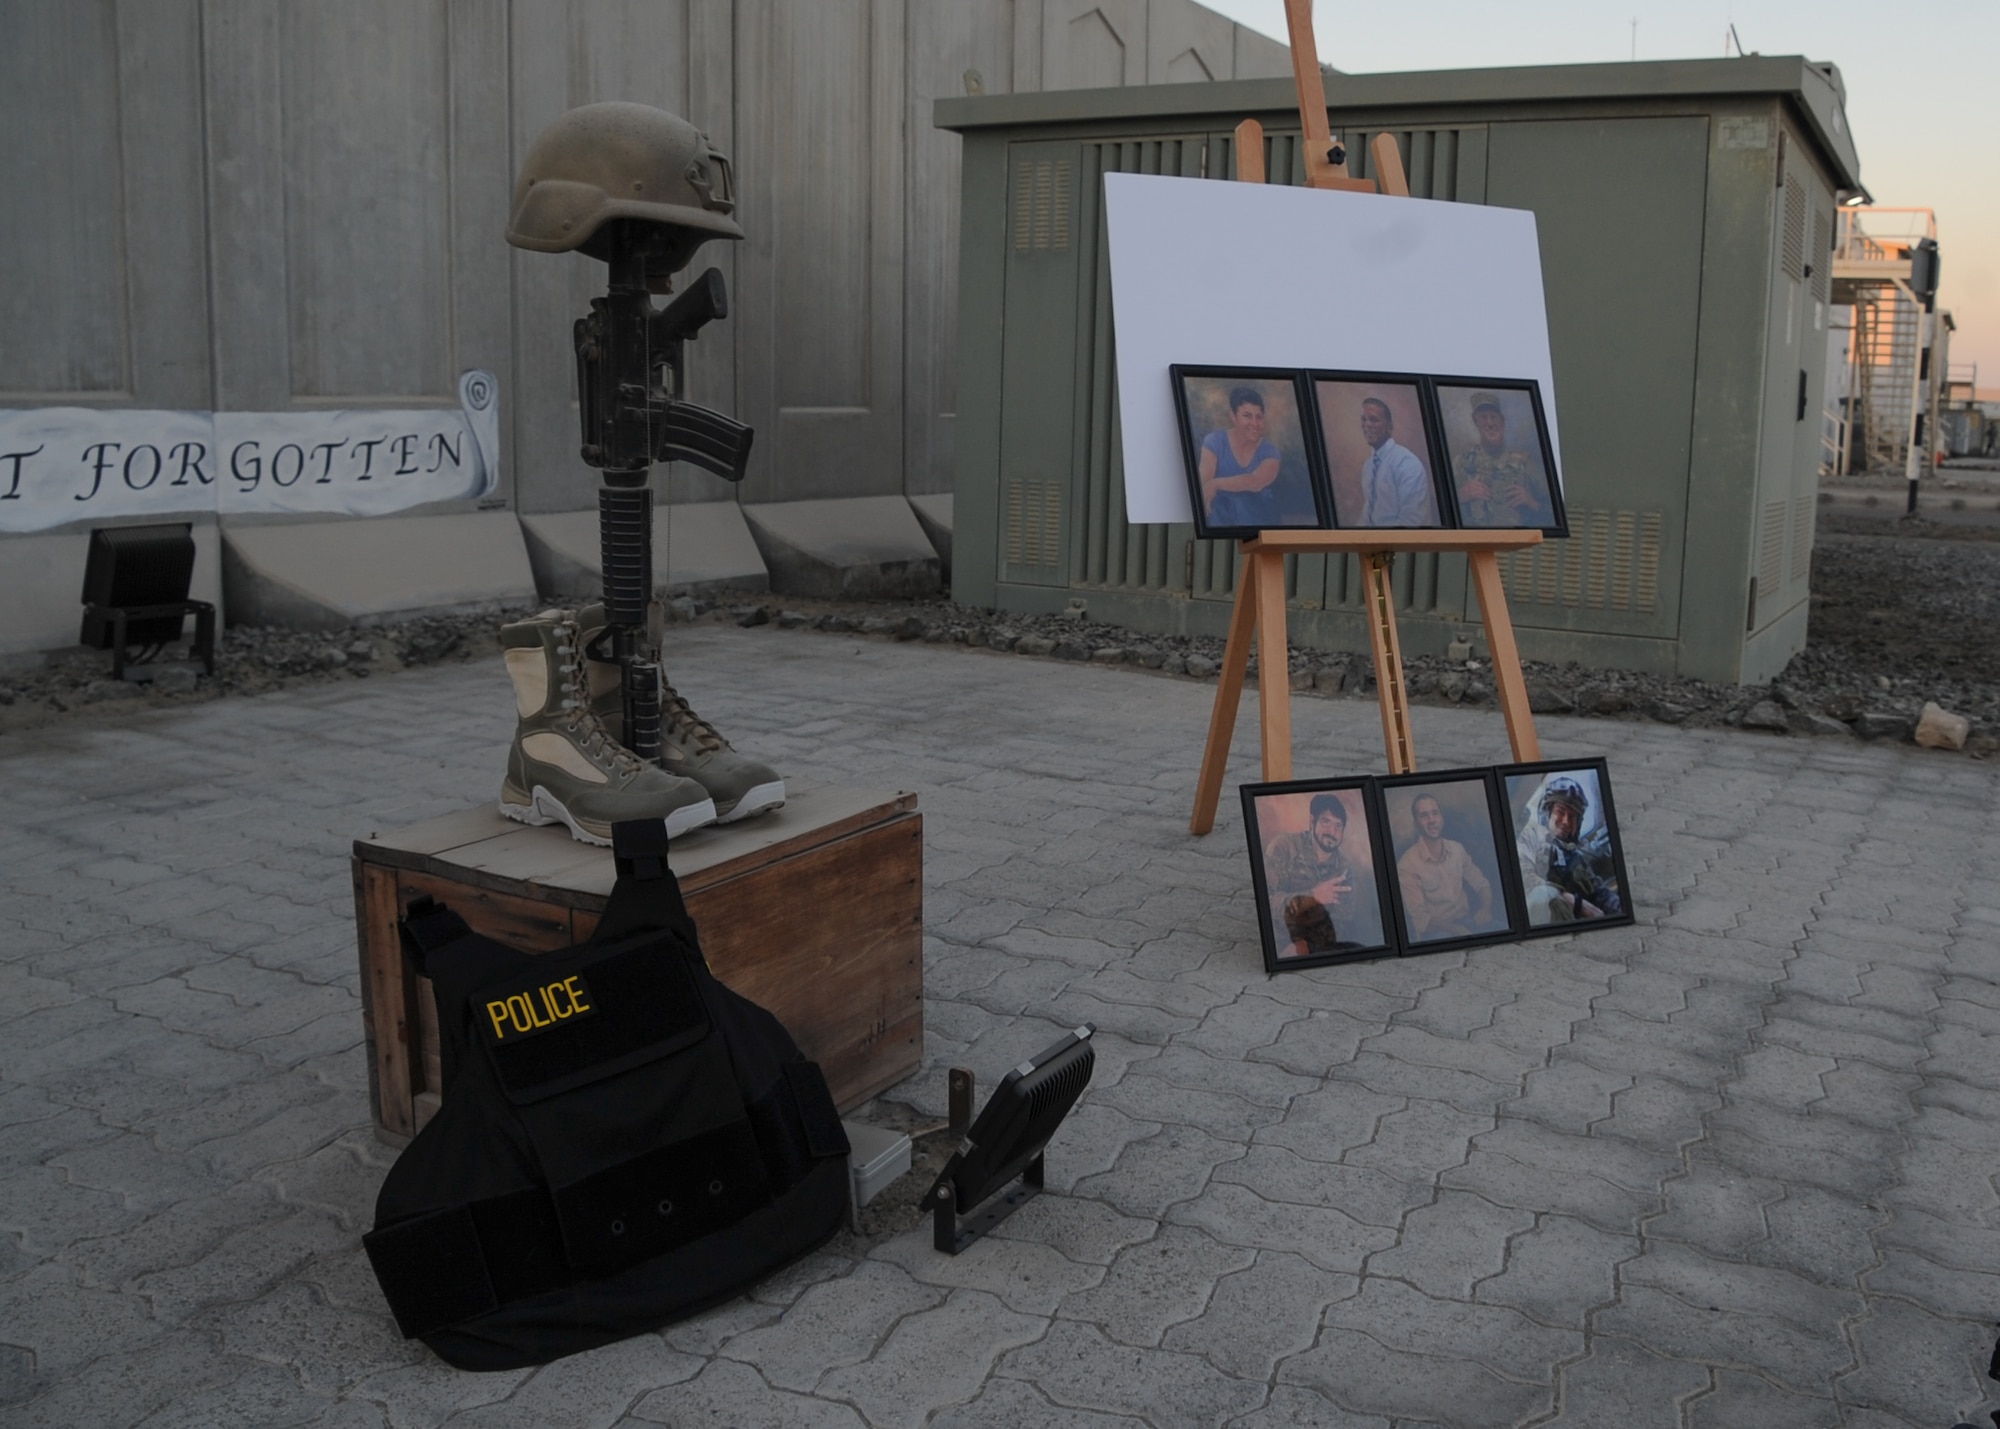 The 380th Expeditionary Wing, Security Forces Squadron, displays photos of 6 members who lost their lives in support of Operation Iraqi Freedom, Enduring Freedom, Freedom’s Sentinel and Inherent Resolve during a remembrance ceremony at Al Dhafra Air Base, United Arab Emirates Dec. 21, 2017. The ceremony highlighted the heroic actions of Security Forces Airmen and Office of Special Investigations special agents who lost their lives during combat operations. (U.S. Air National Guard Photo by Staff Sgt. Colton Elliott)